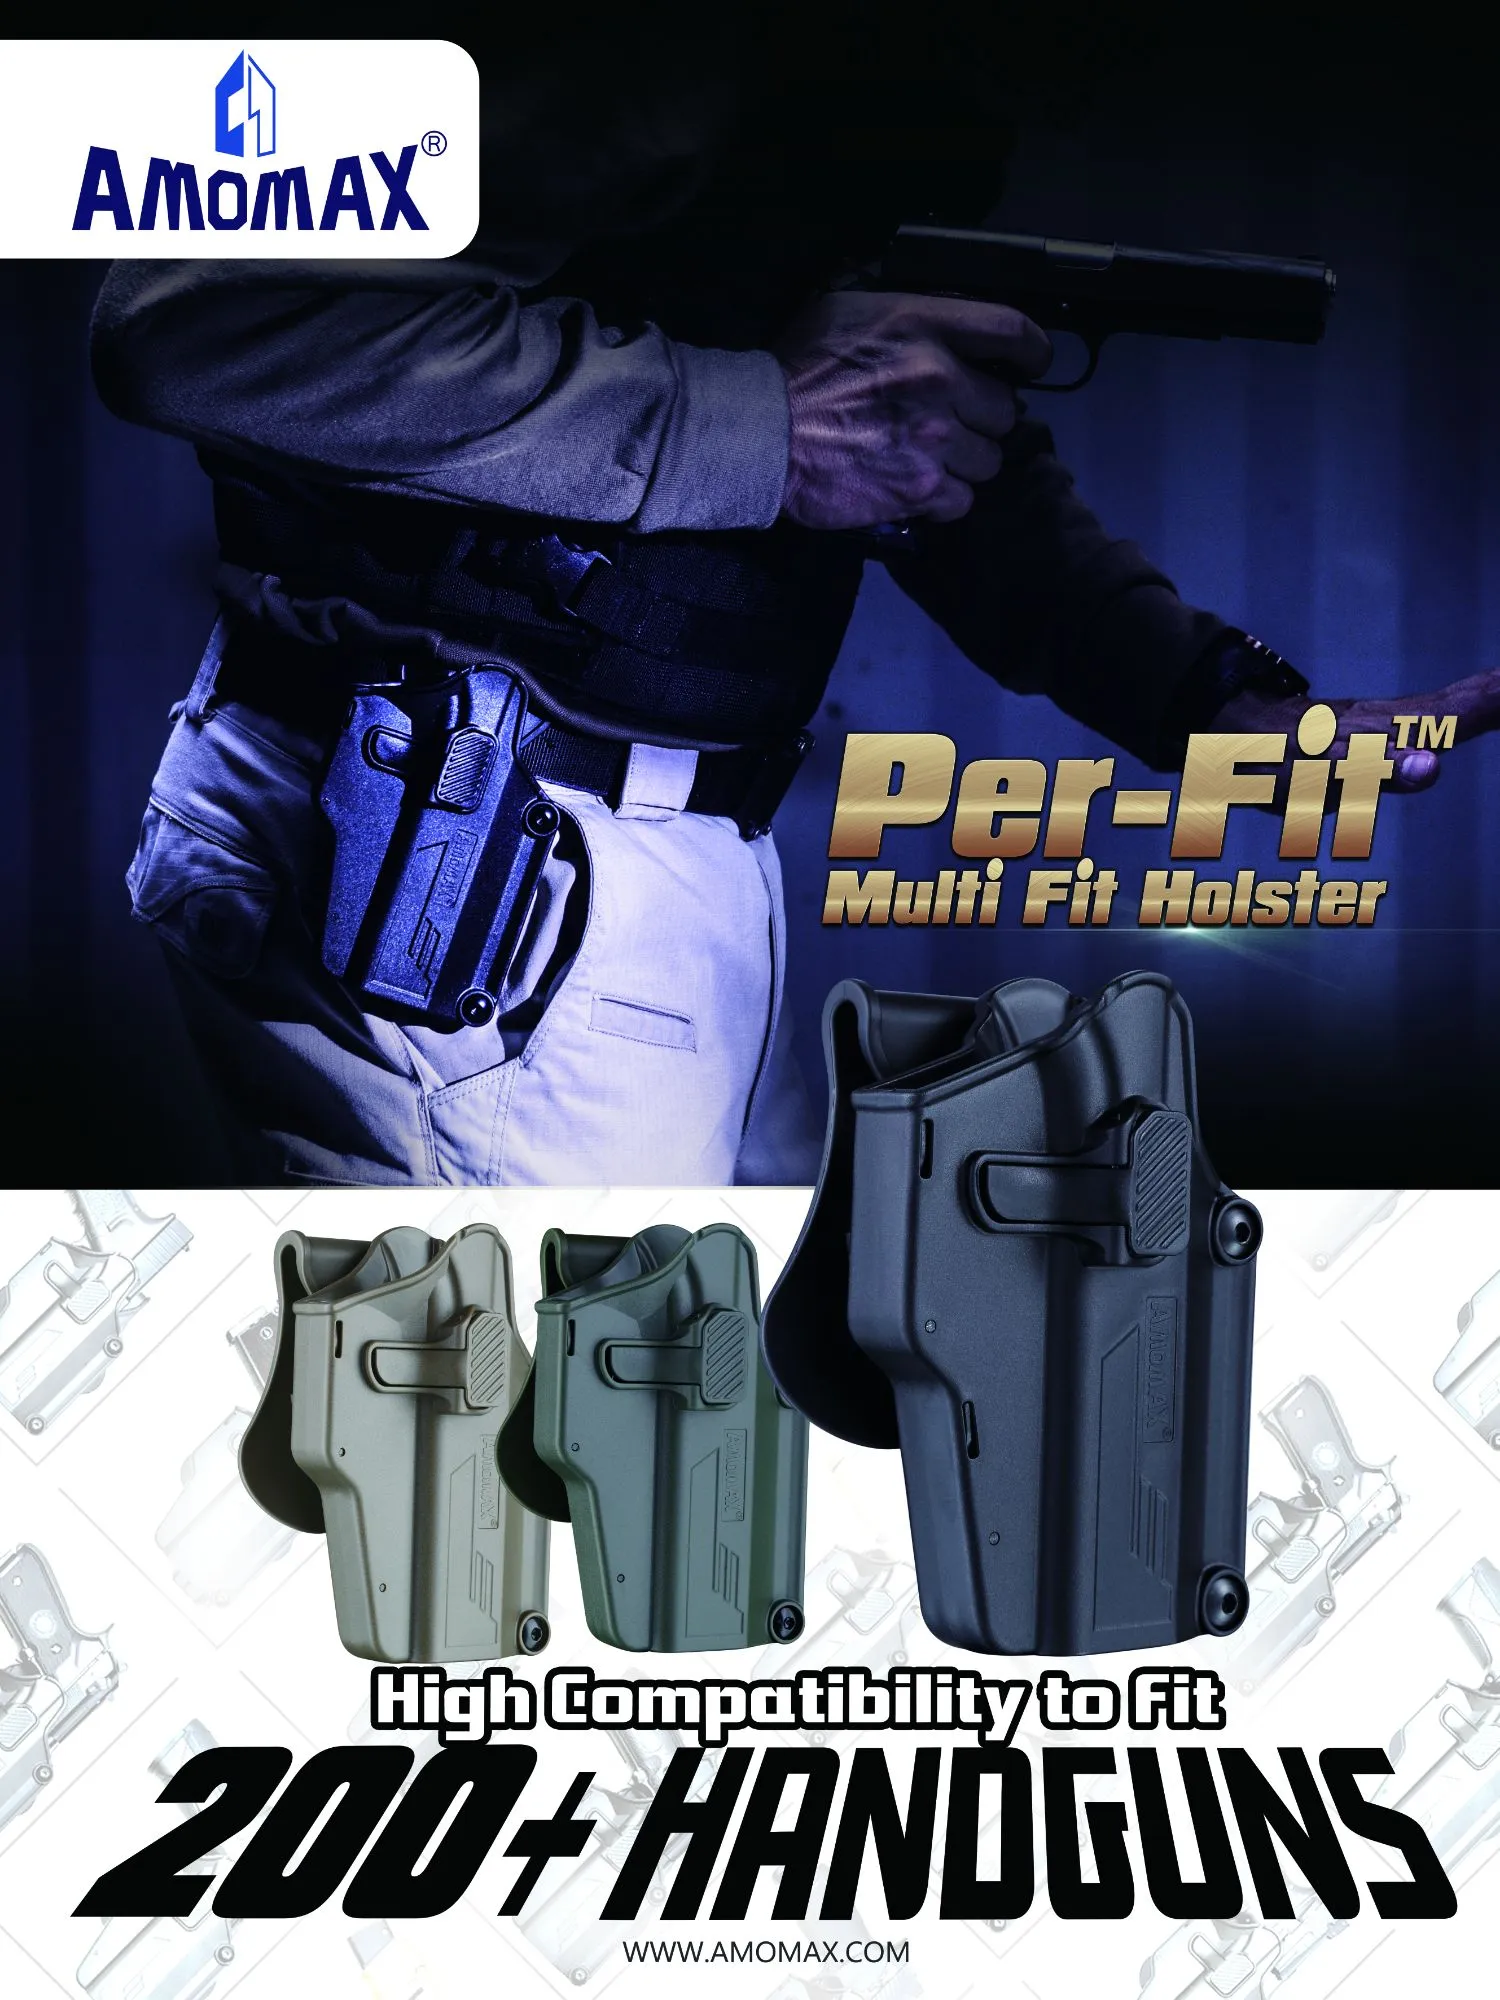 SALE／97%OFF】【SALE／97%OFF】AMOMAX AM-UH Per-Fit Holster 装備・備品